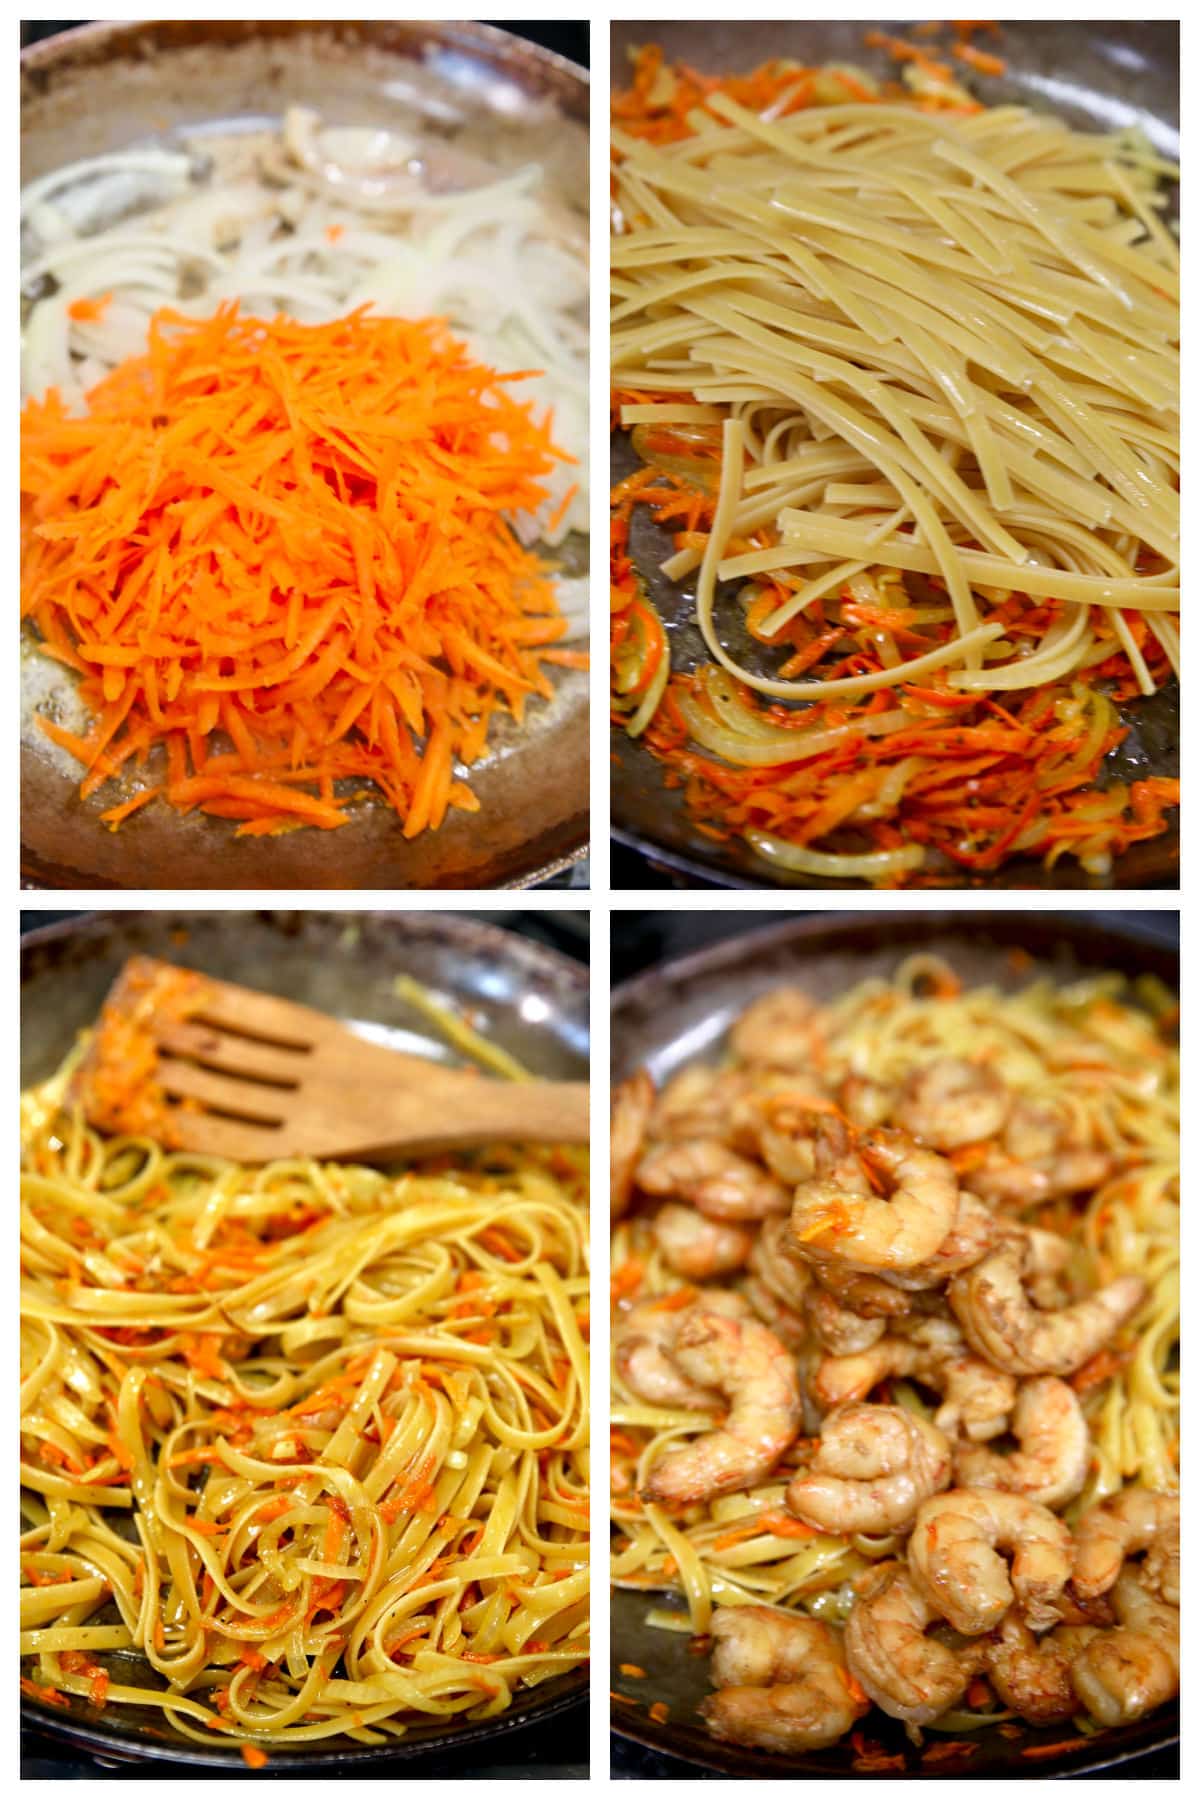 Collage: stir frying onions and carrots, adding pasta, shrimp.